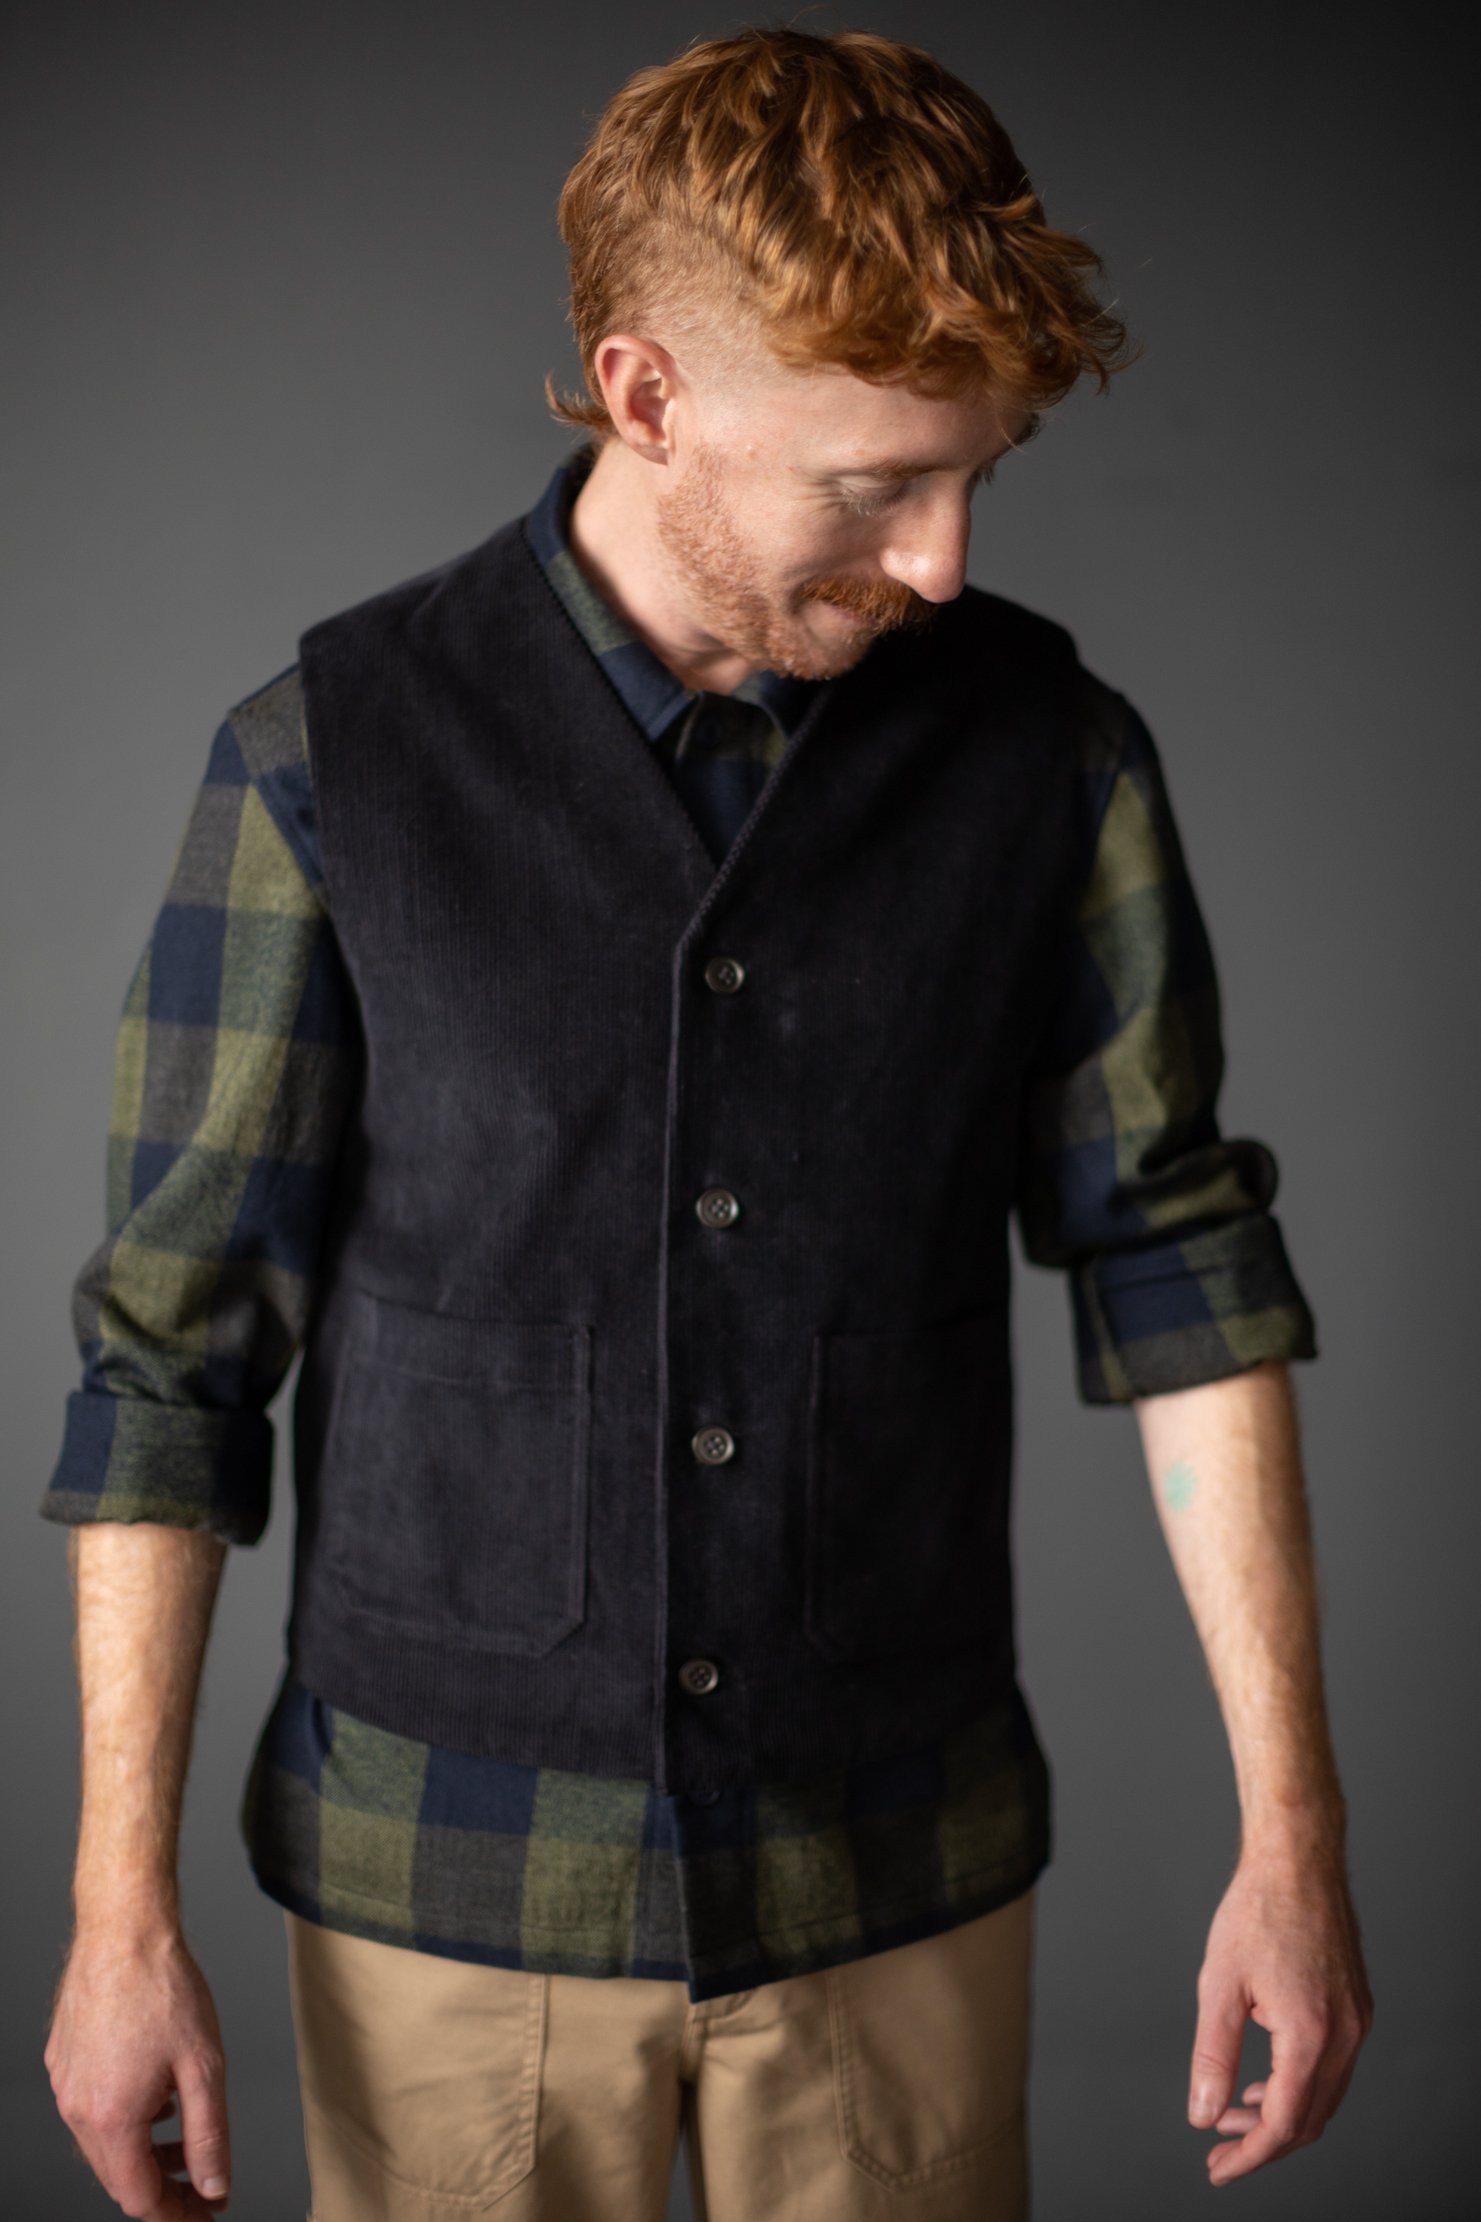 Man wearing The Men's Billy Gilet sewing pattern from Merchant & Mills on The Fold Line. A Gilet pattern made in dry oilskin, oilskin, linen, denim, wool, corduroy, cotton twills or canvas fabrics, featuring front patch pockets, front button closure and V-neck.